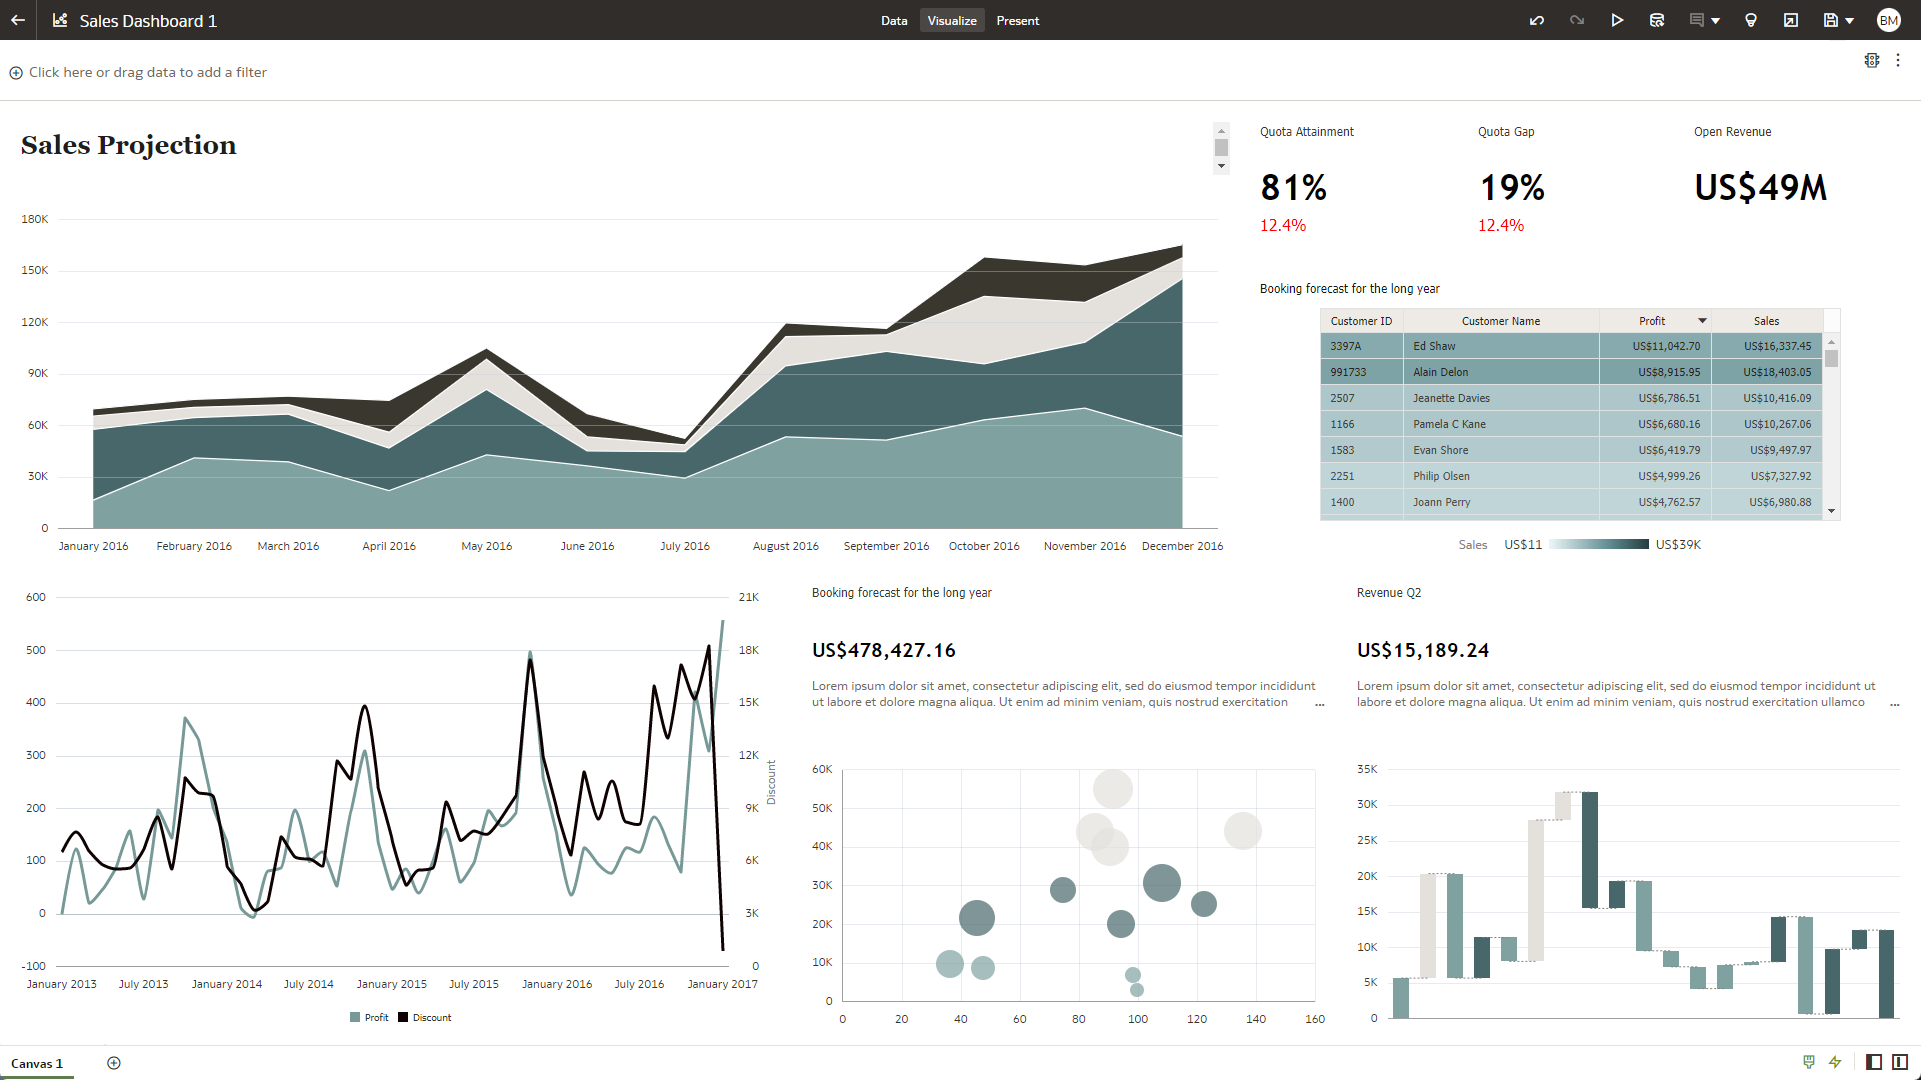 Oracle Analytics Cloud 496737bd-3cee-41e8-a268-9d762b433ab4.png